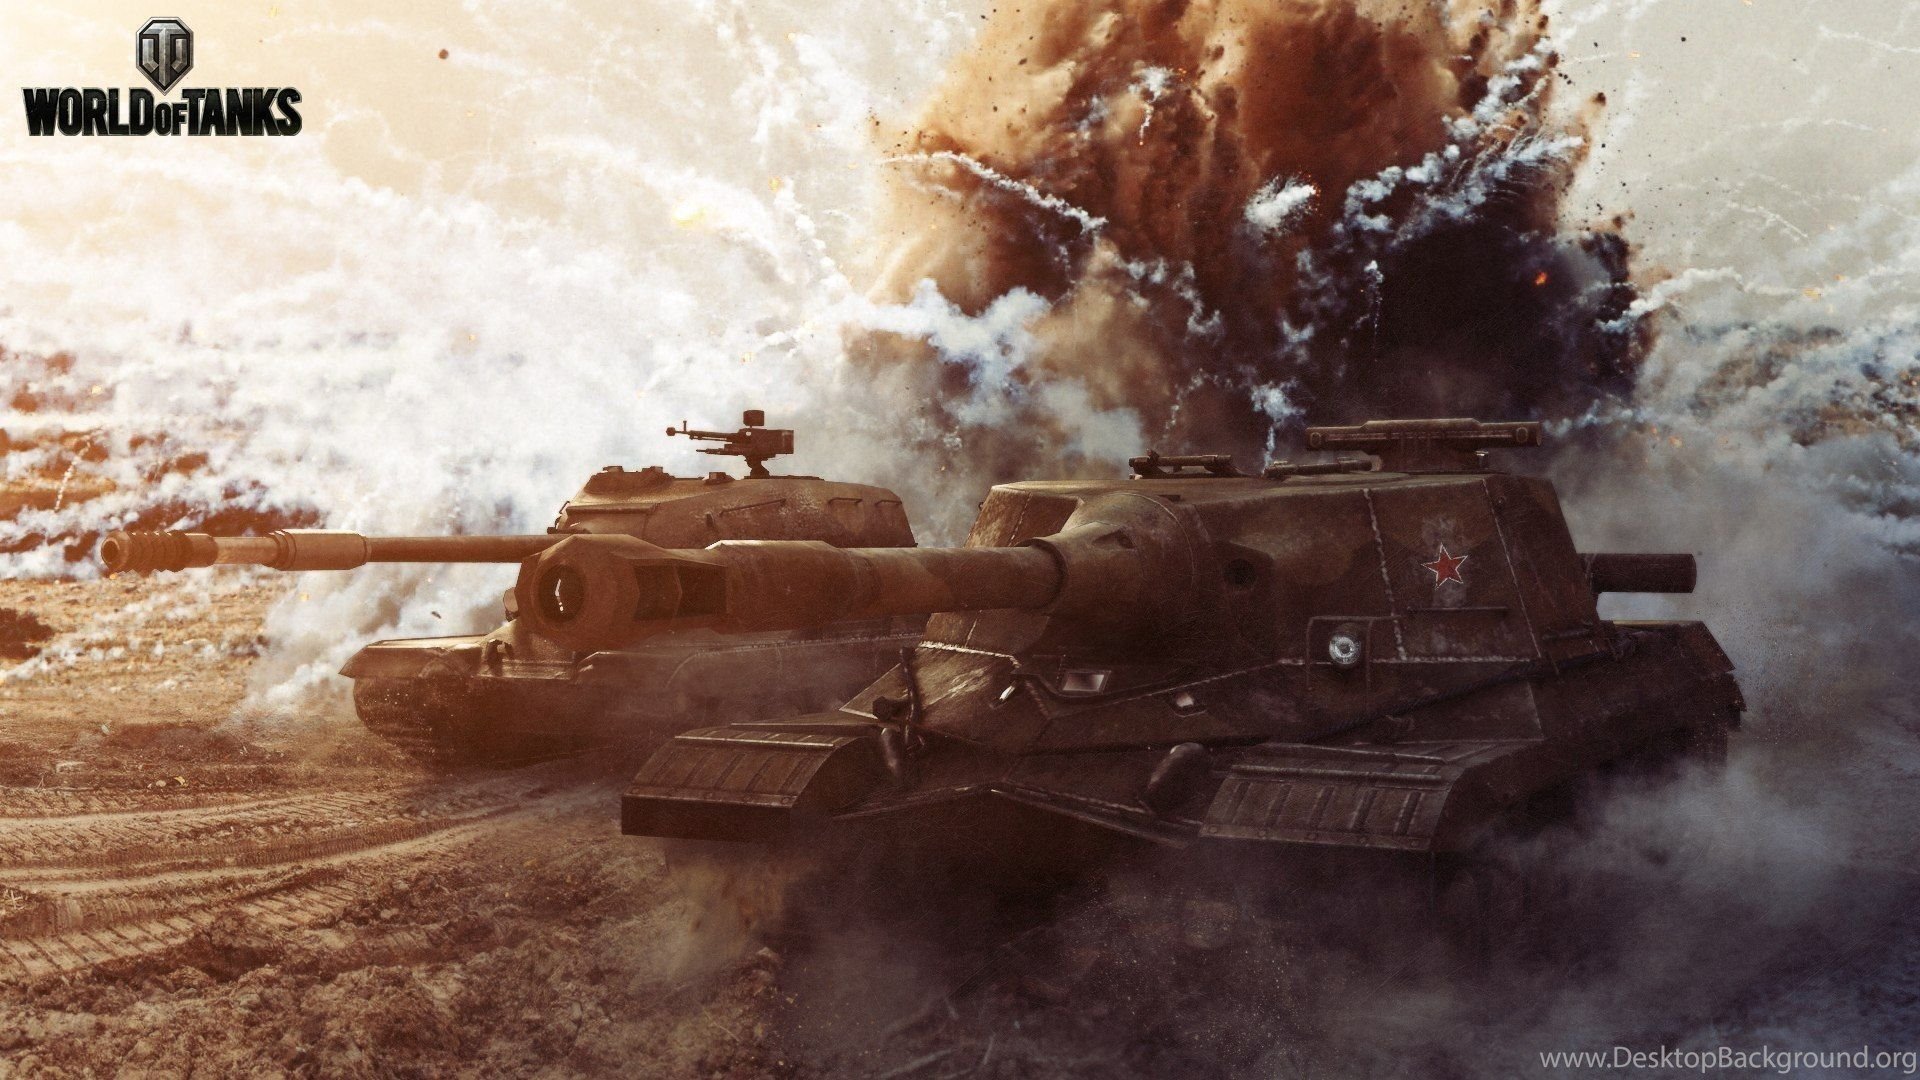 World Of Tanks: Russian Tank Under Fire Wallpaper And Image. Desktop Background